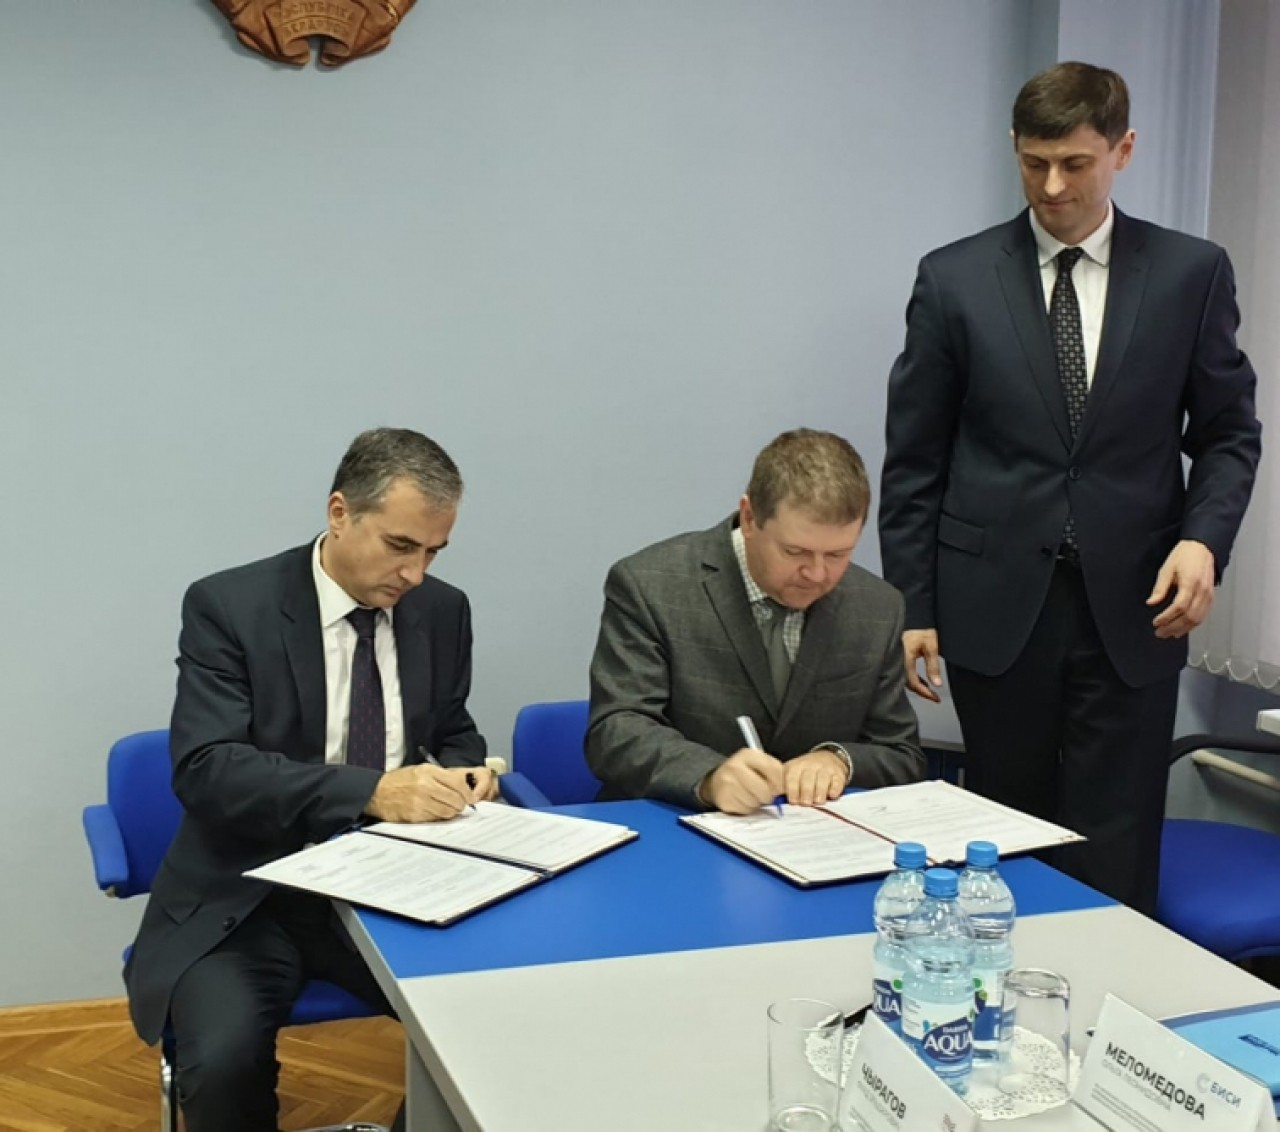 MoU signed between AIR Center and Belarus Strategic Research Institution